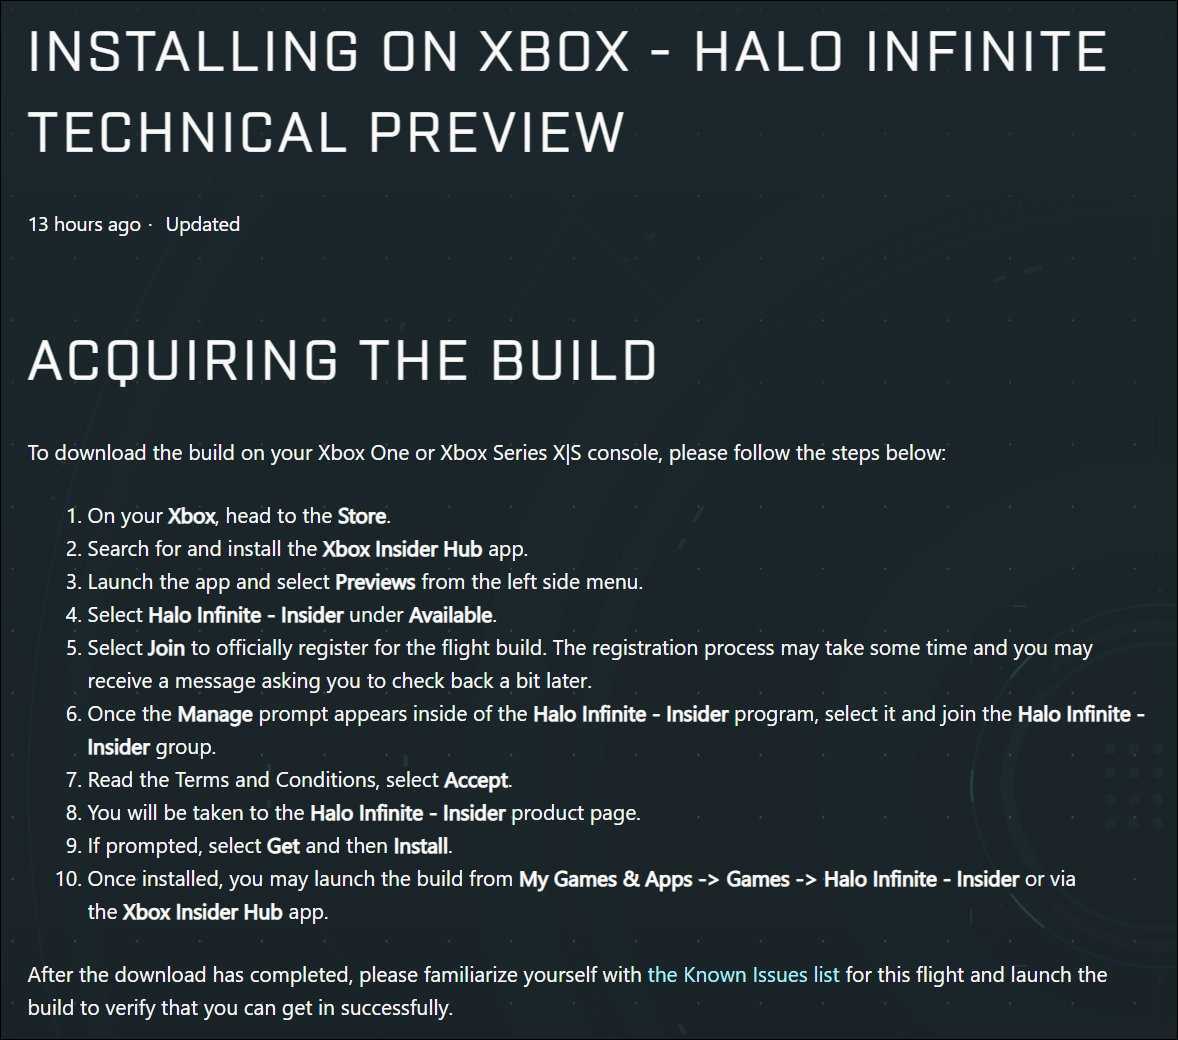 HaloInfiniteTechPreviewGuide